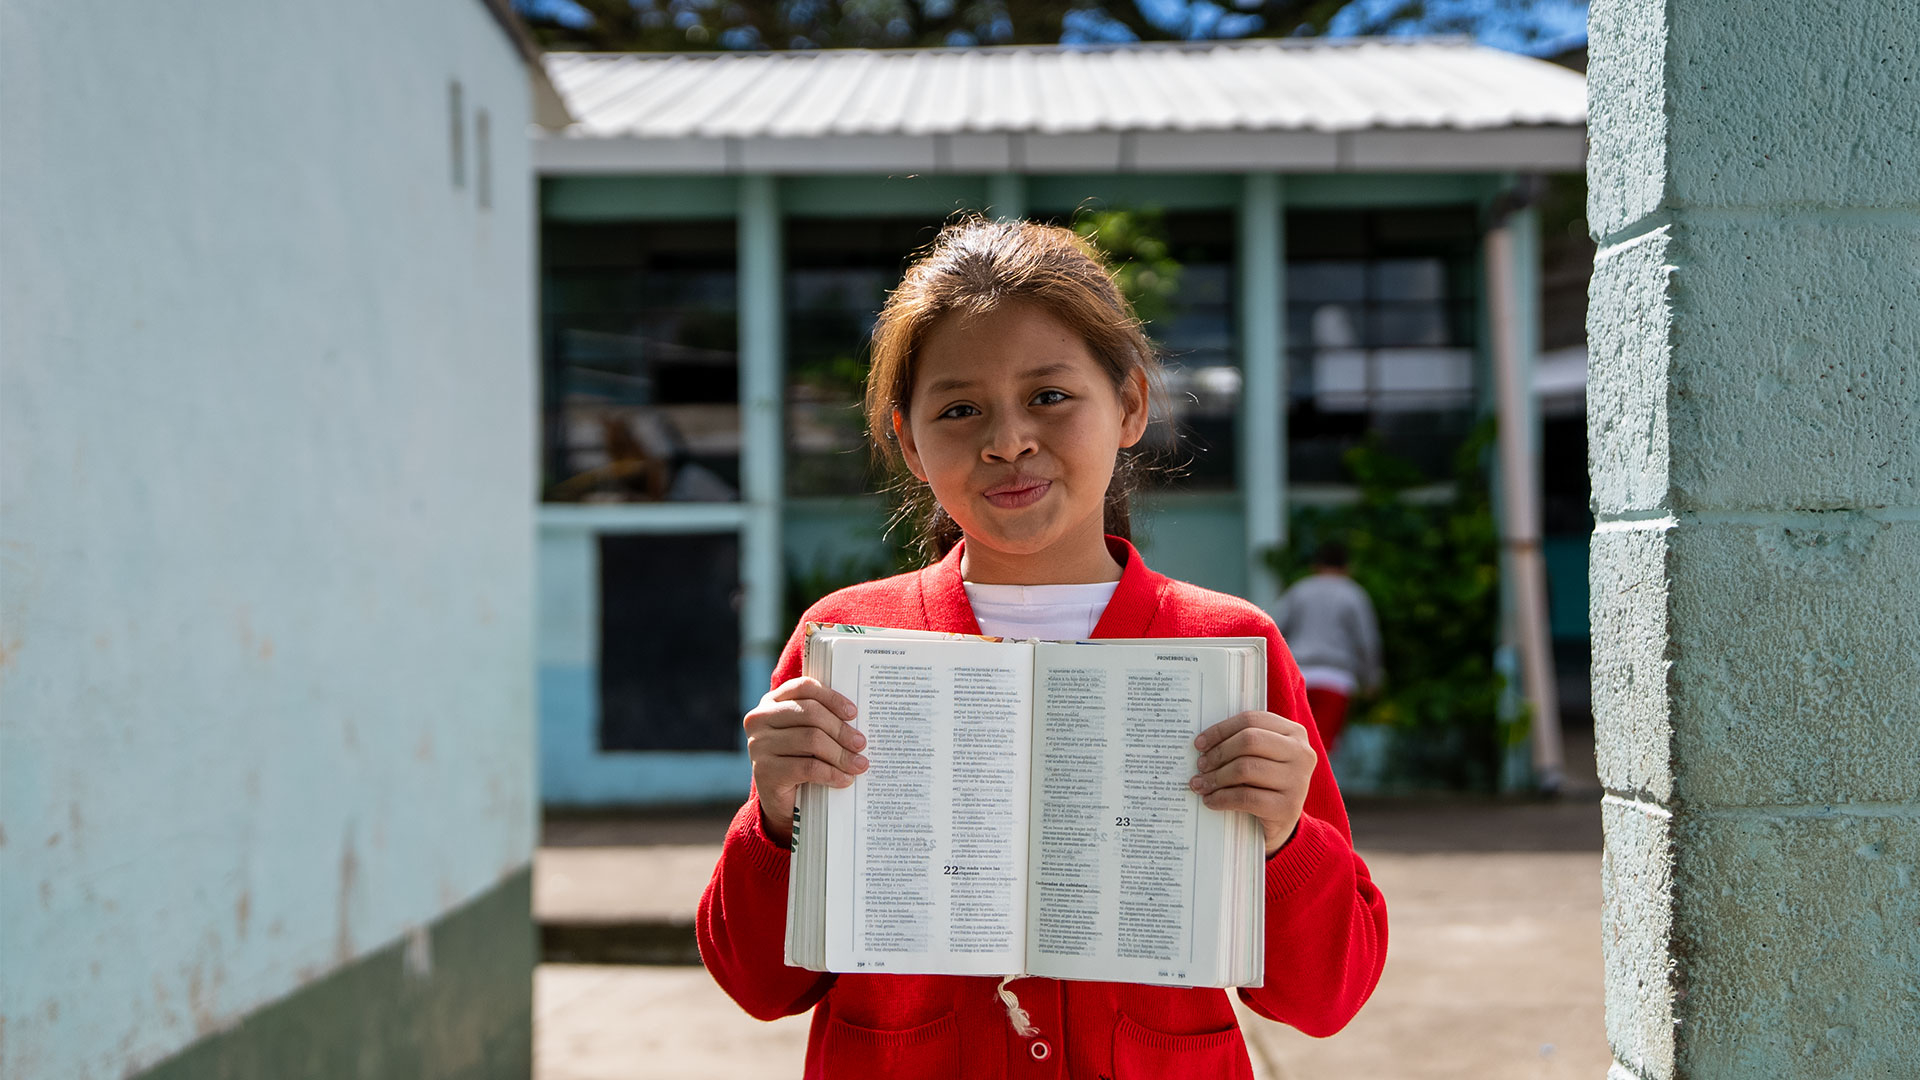 Schools in Guatemala can be scary places. Children feel trapped in cycles of poverty and violence. You can change that for a child right now by sharing the Bible.